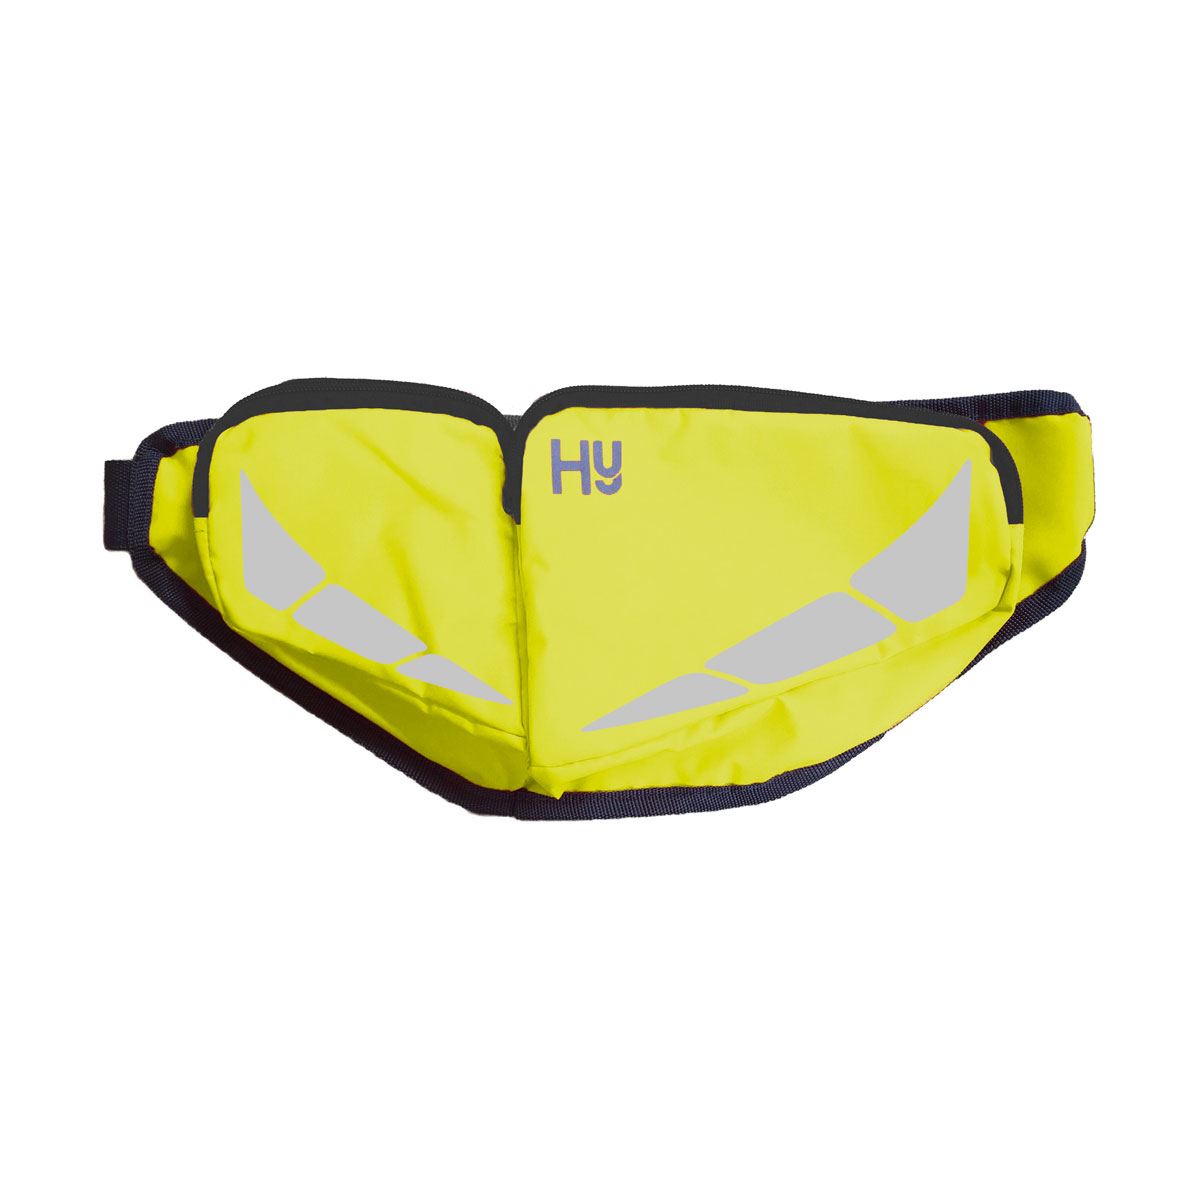 Reflector Bum Bag by Hy Equestrian - Just Horse Riders